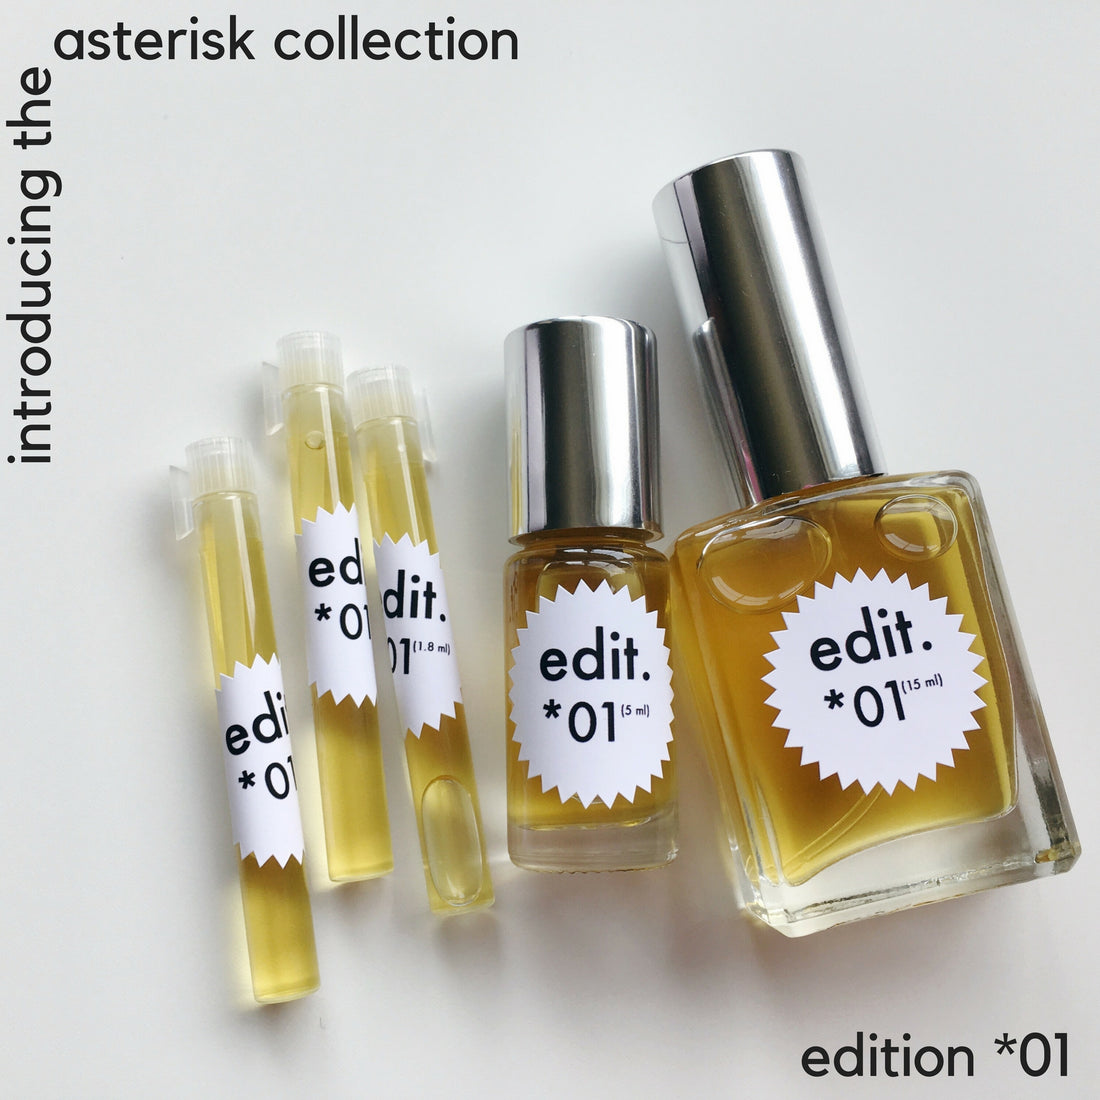 Introducing The Asterisk Collection Edition *01